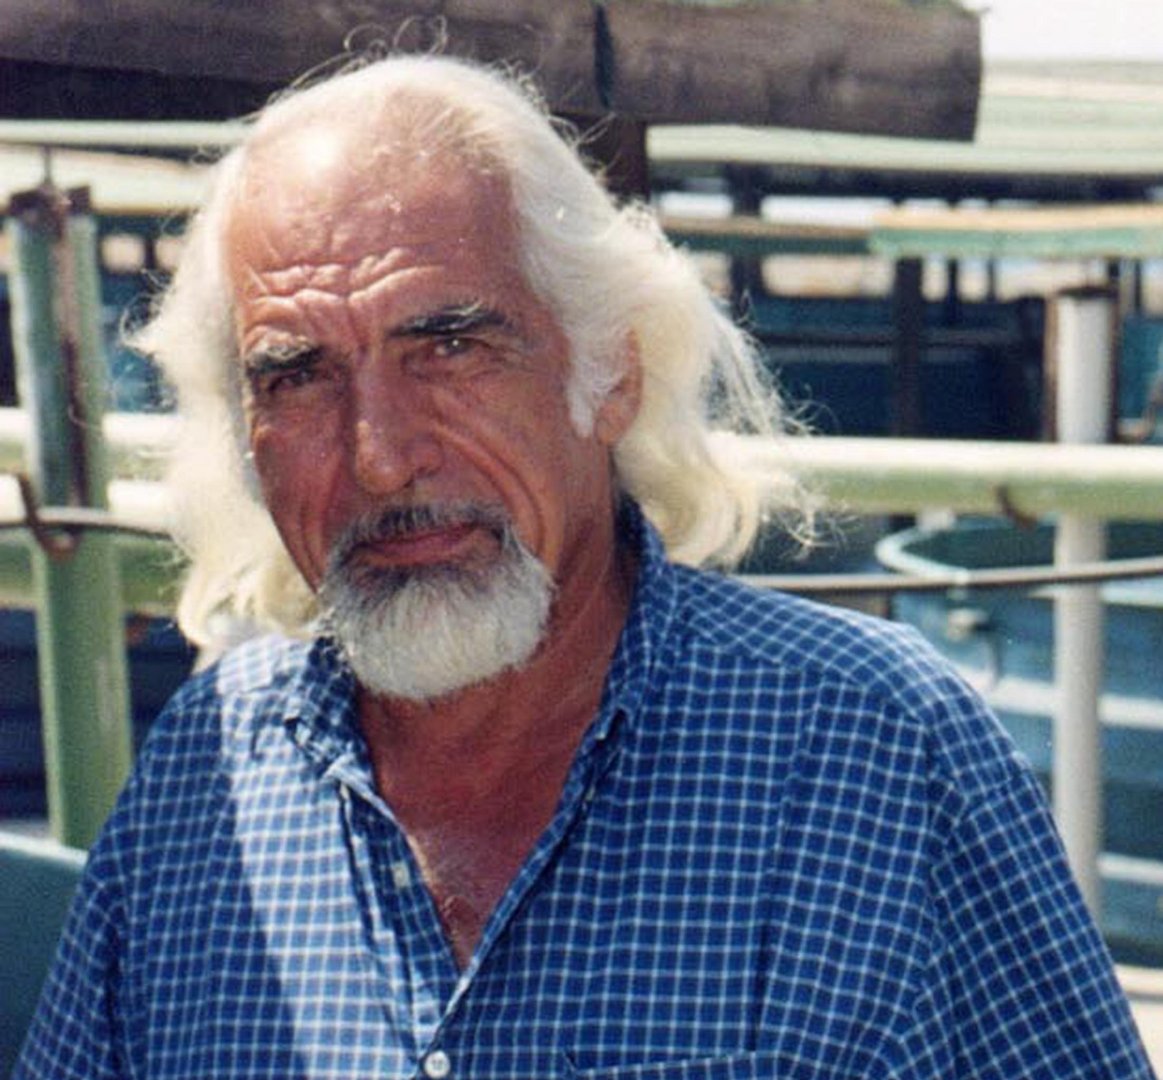 image Well-known ‘turtle protector’ and conservationist Andreas Demetropoulos dies aged 84 (Updated)